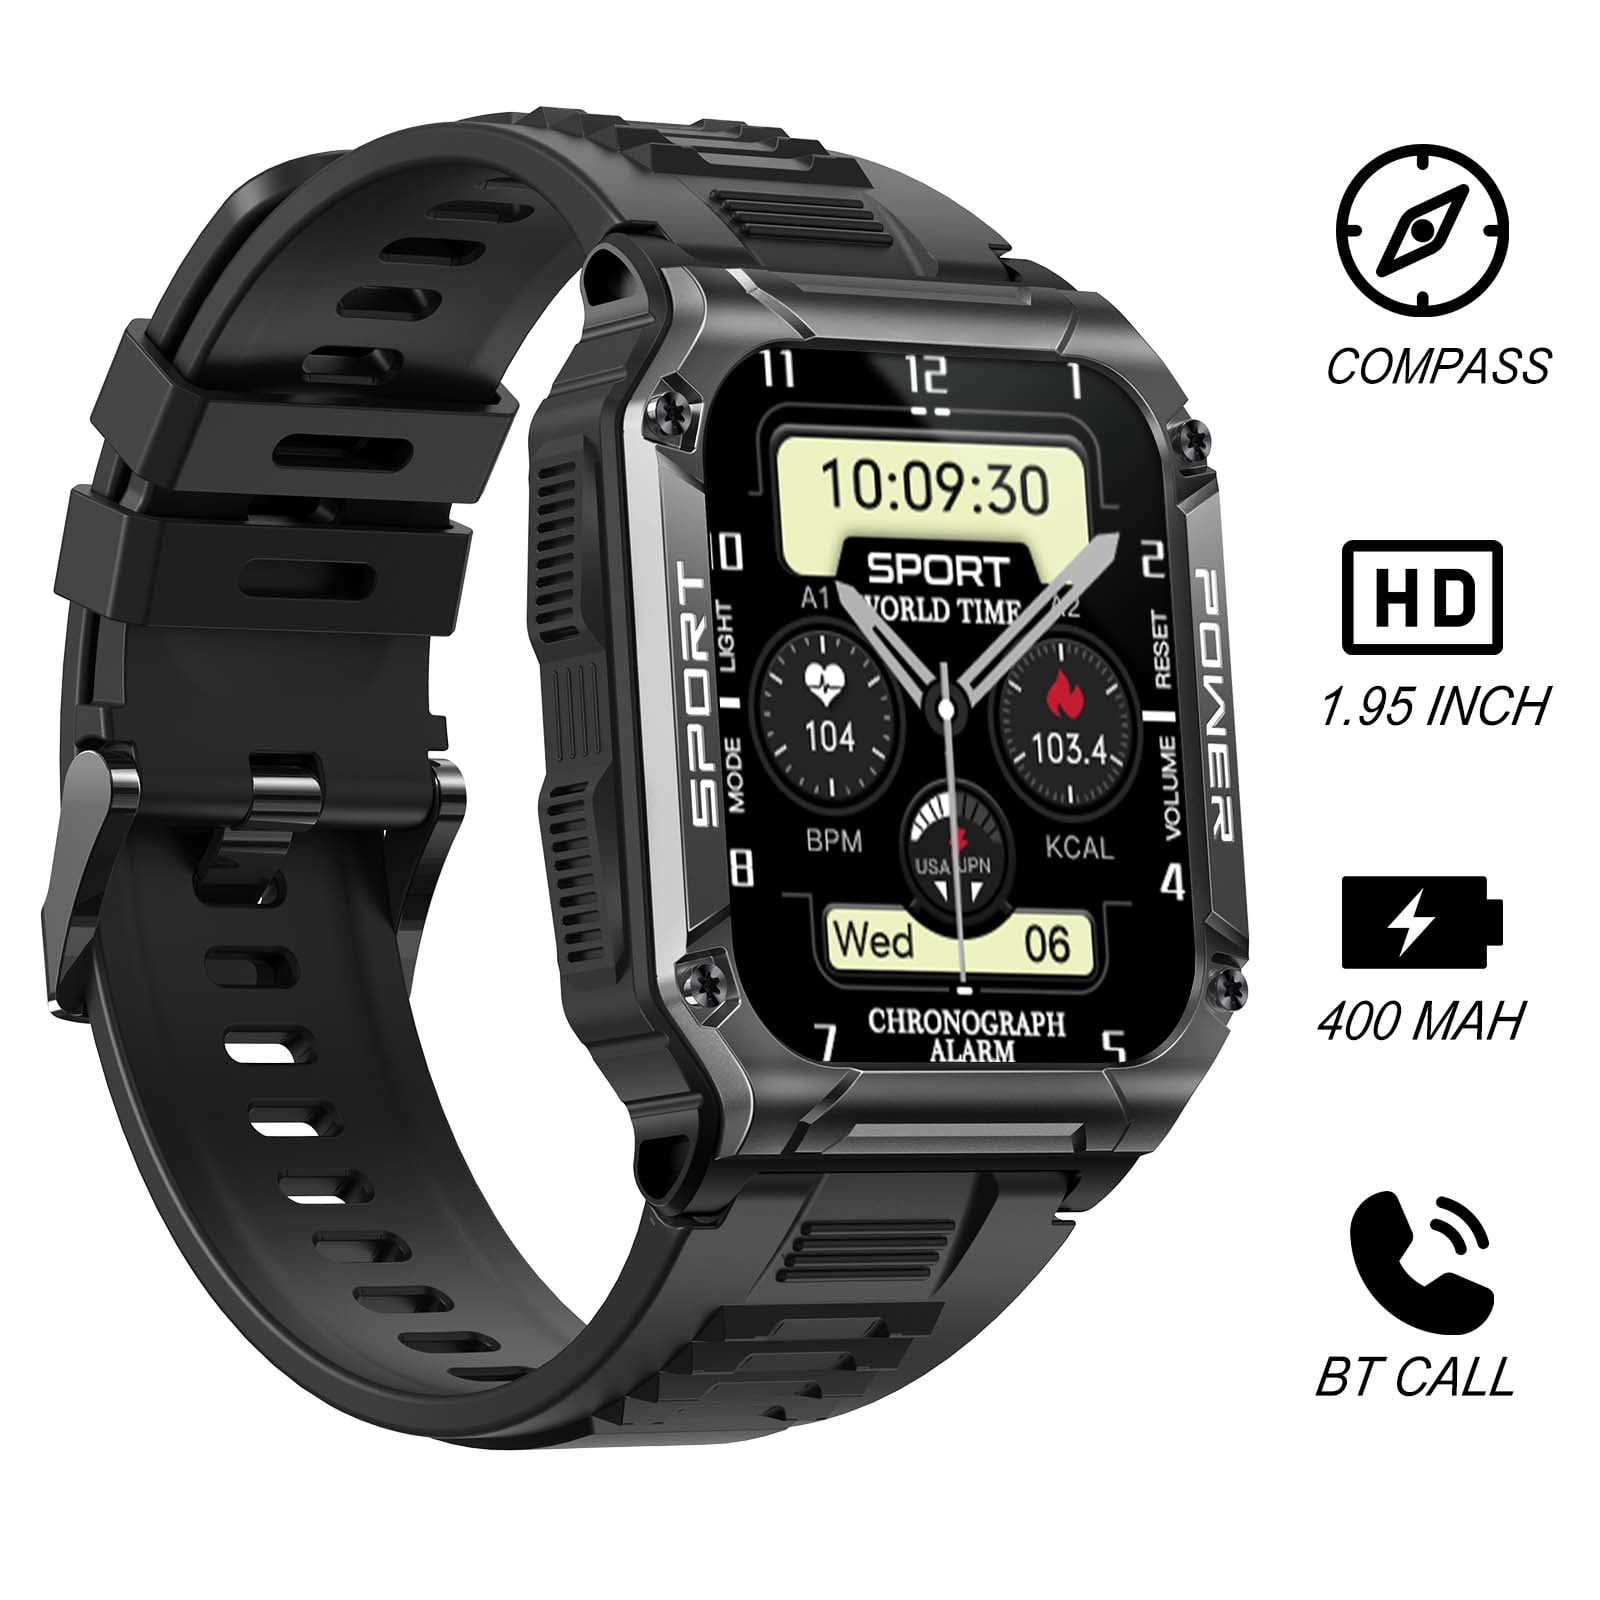 EIGIIS Military Smart Watches for Men, 1.95 Smart Watch with Bluetooth Call (Answer/Make Calls), Fitness Tracker IP68 Waterproof, Multiple Sports Modes, Tactical Smartwatch for Android iPhone - Walmart.com